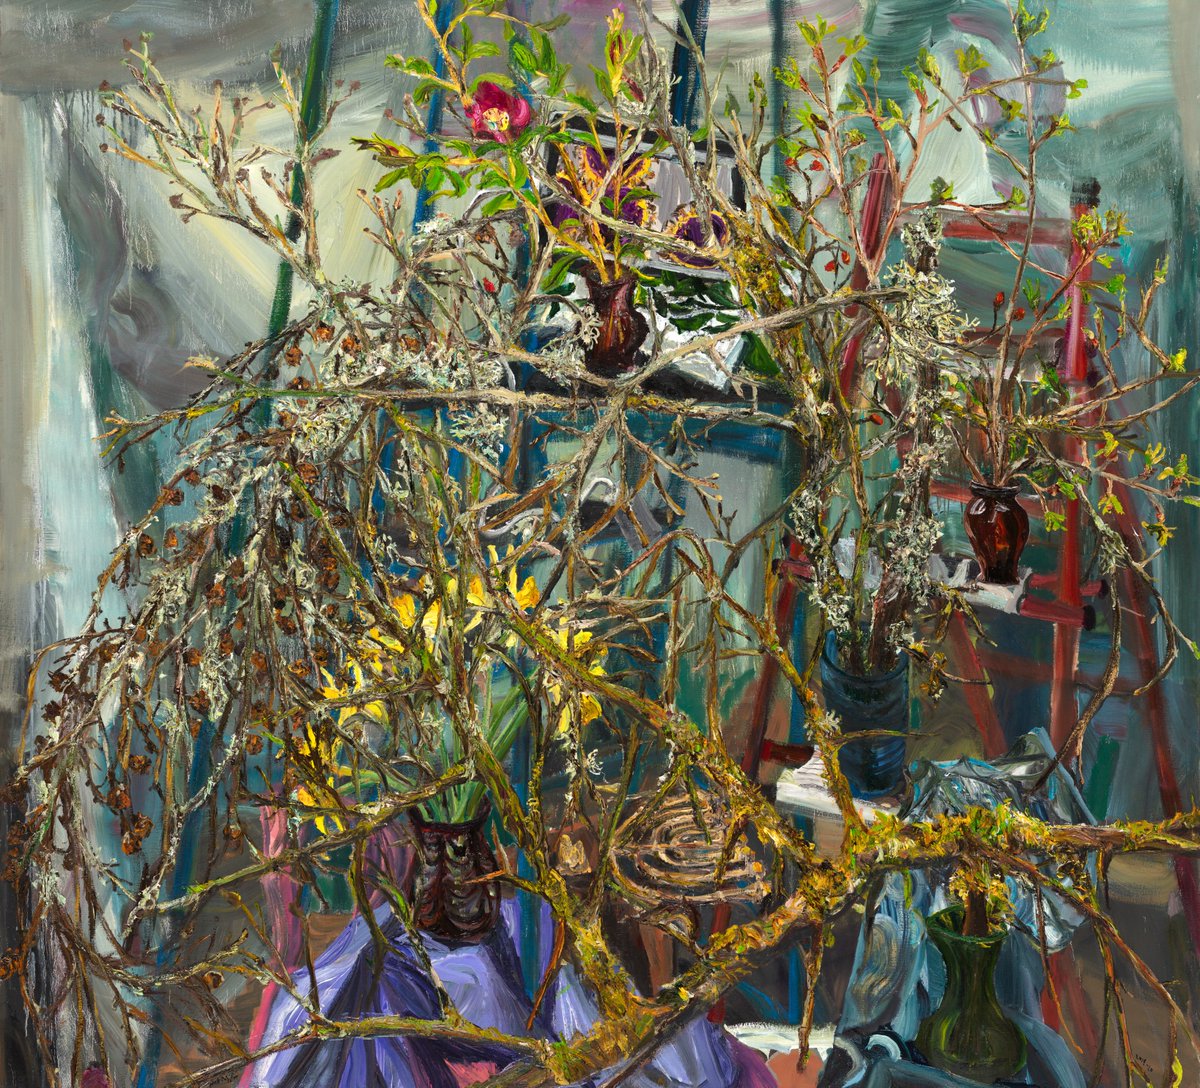 Nick Miller’s painting – Branching and fragmenting: Tikkun Olam, 2019-2020, oil on linen. A Matter of Time at the @CrawfordArtGall